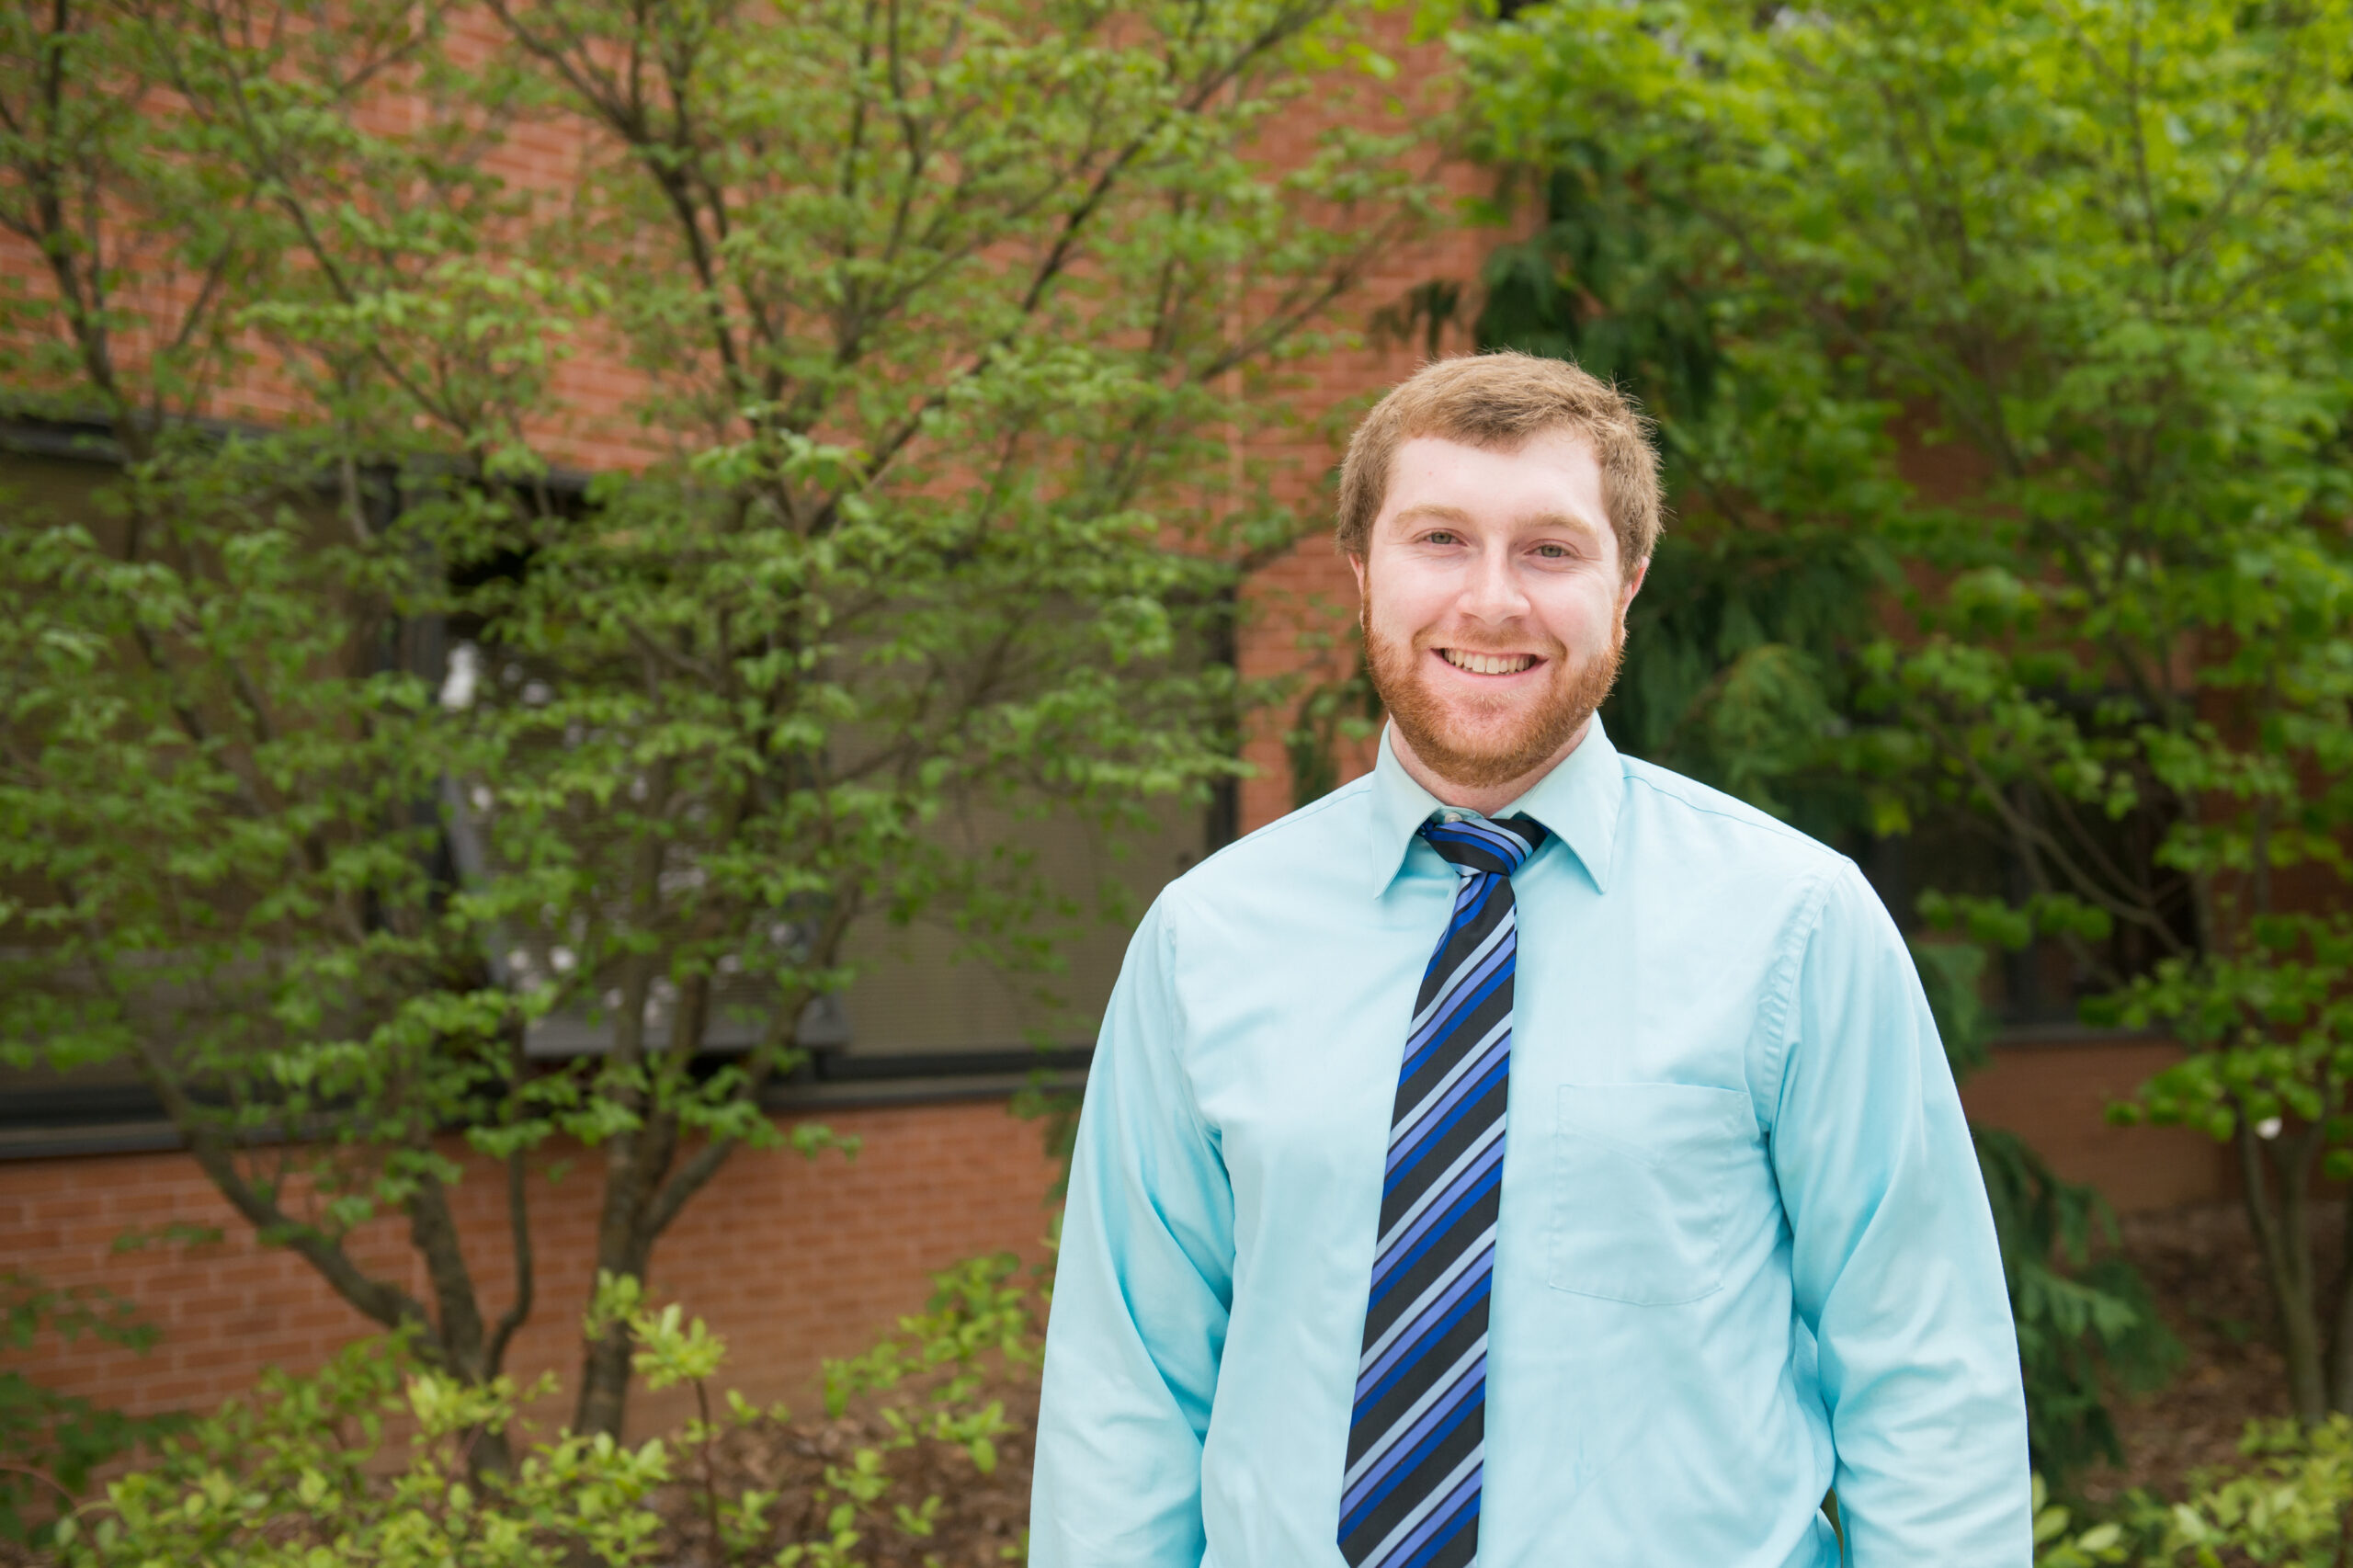 Matthew Kelly to pursue interest in German language and culture through Fulbright teaching assistantship in Bavaria